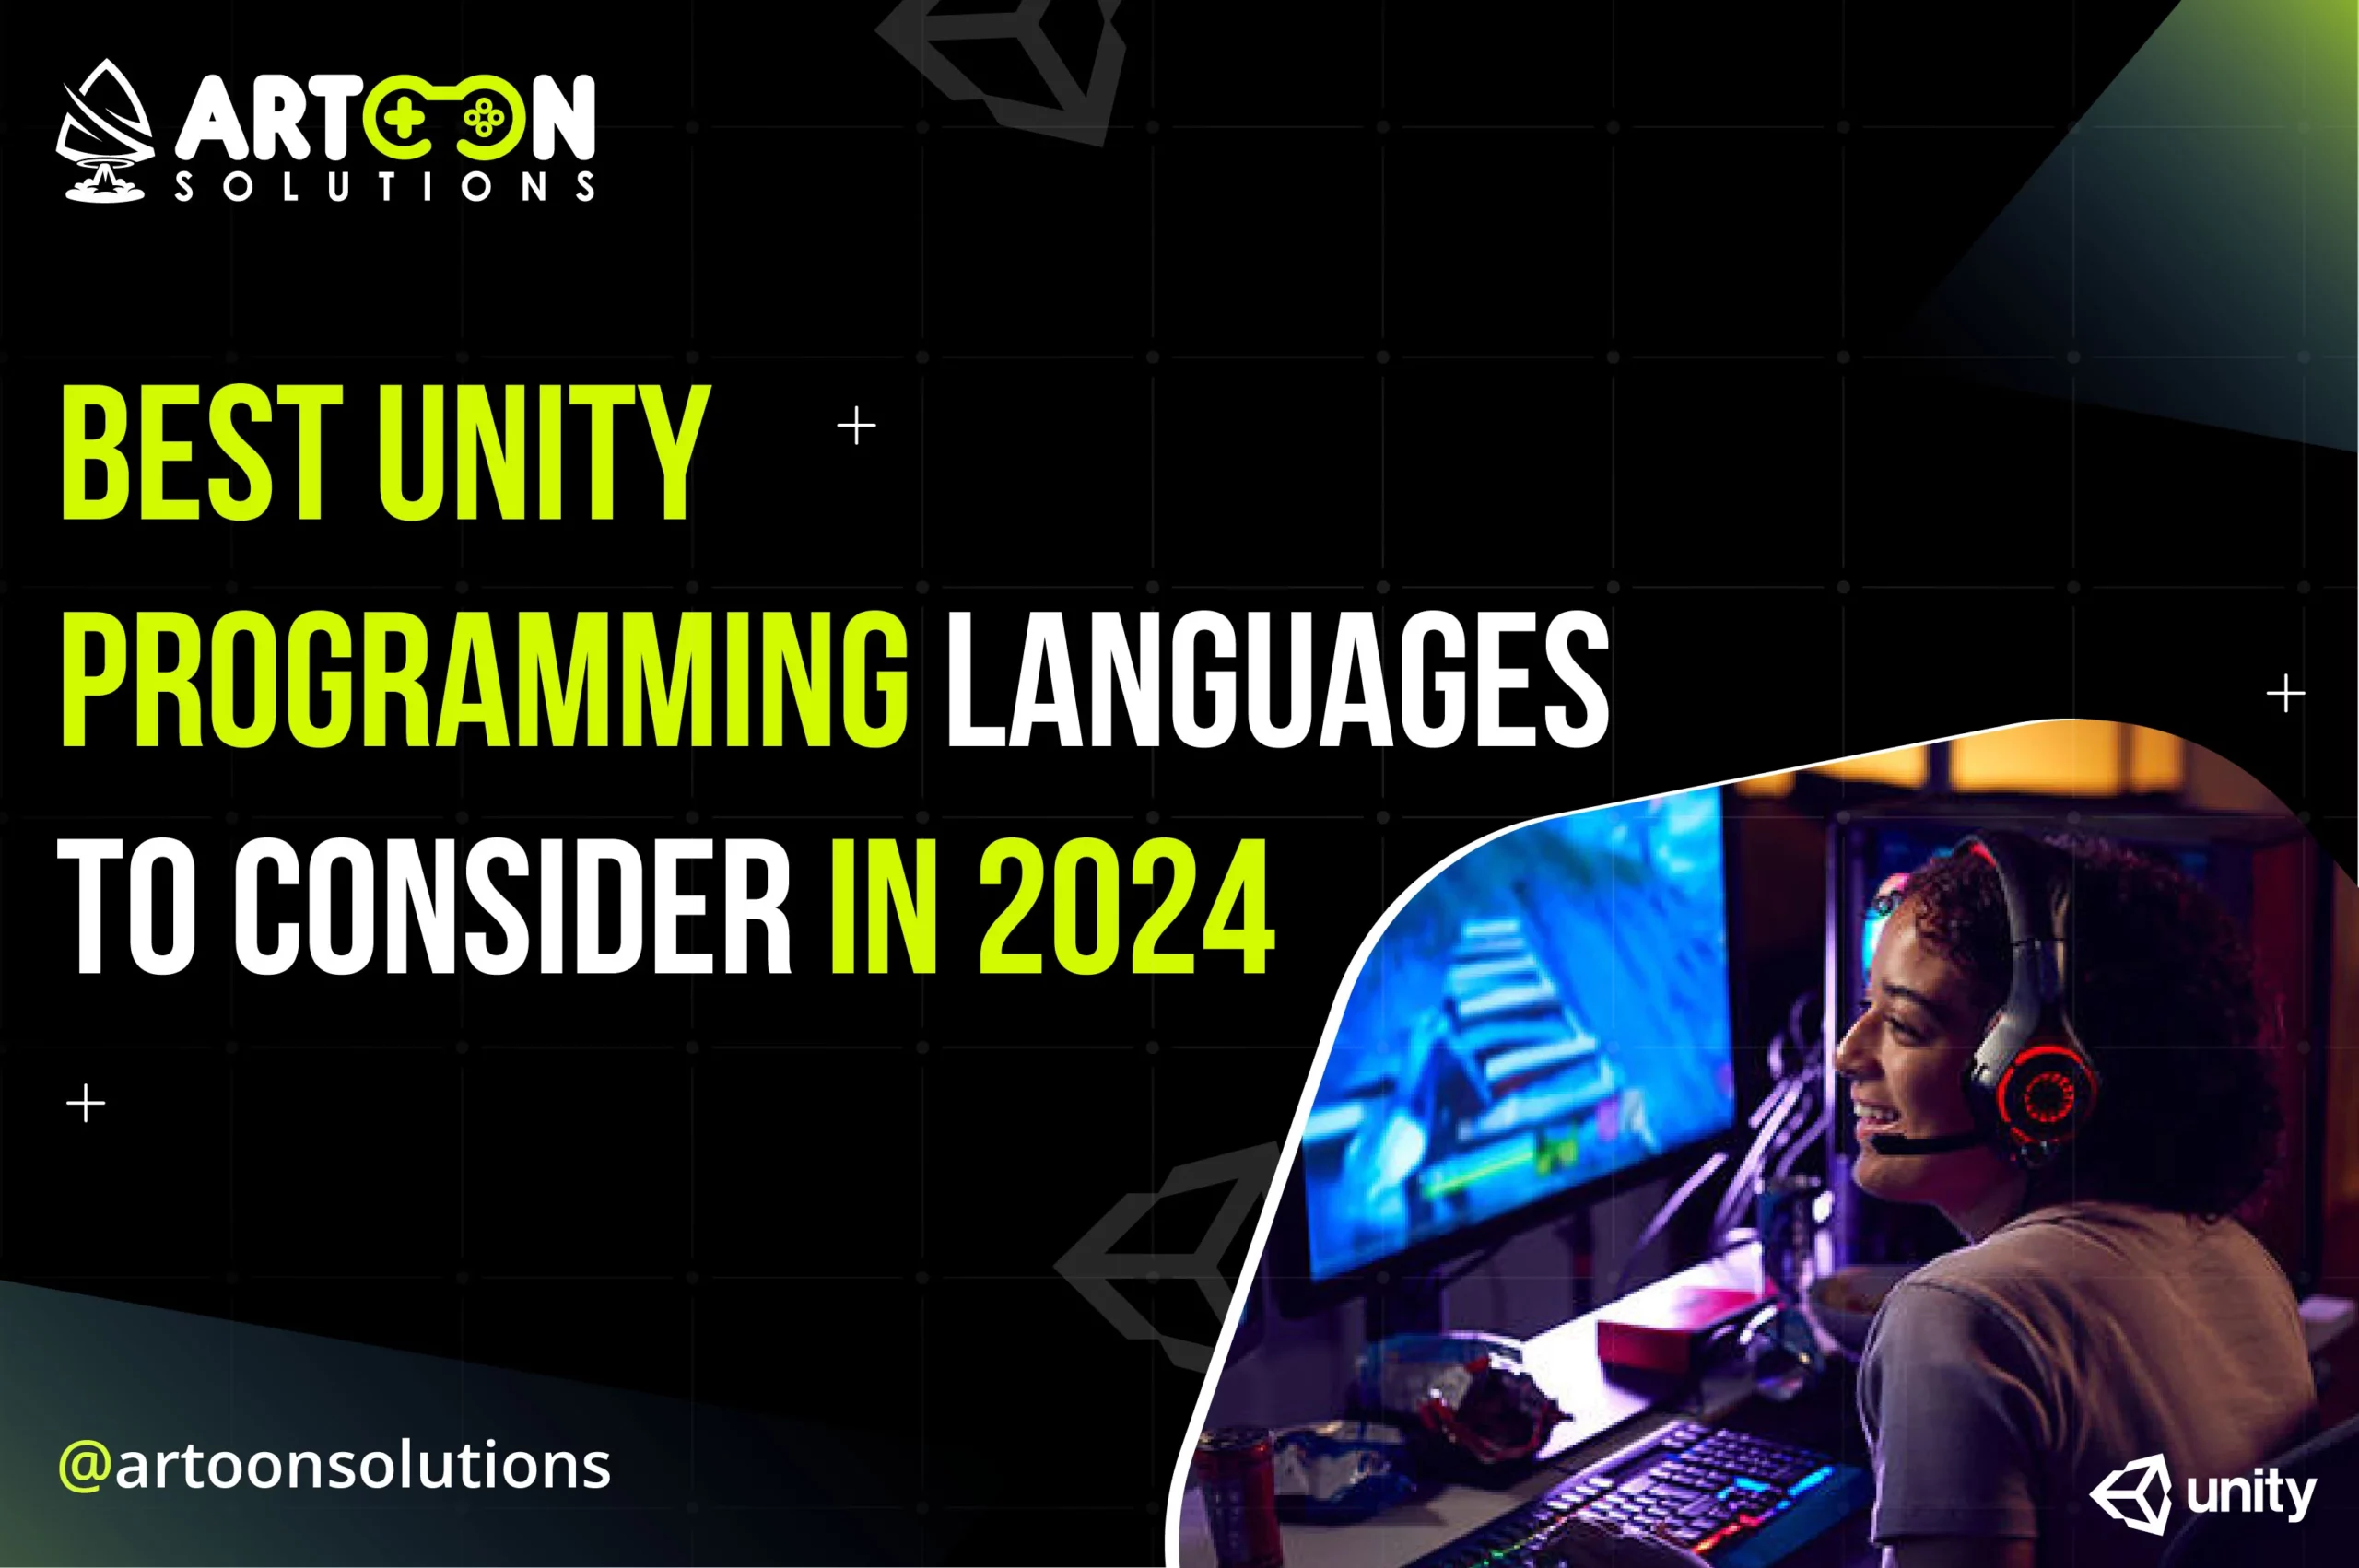 Best Unity Programming Languages To Consider in 2024